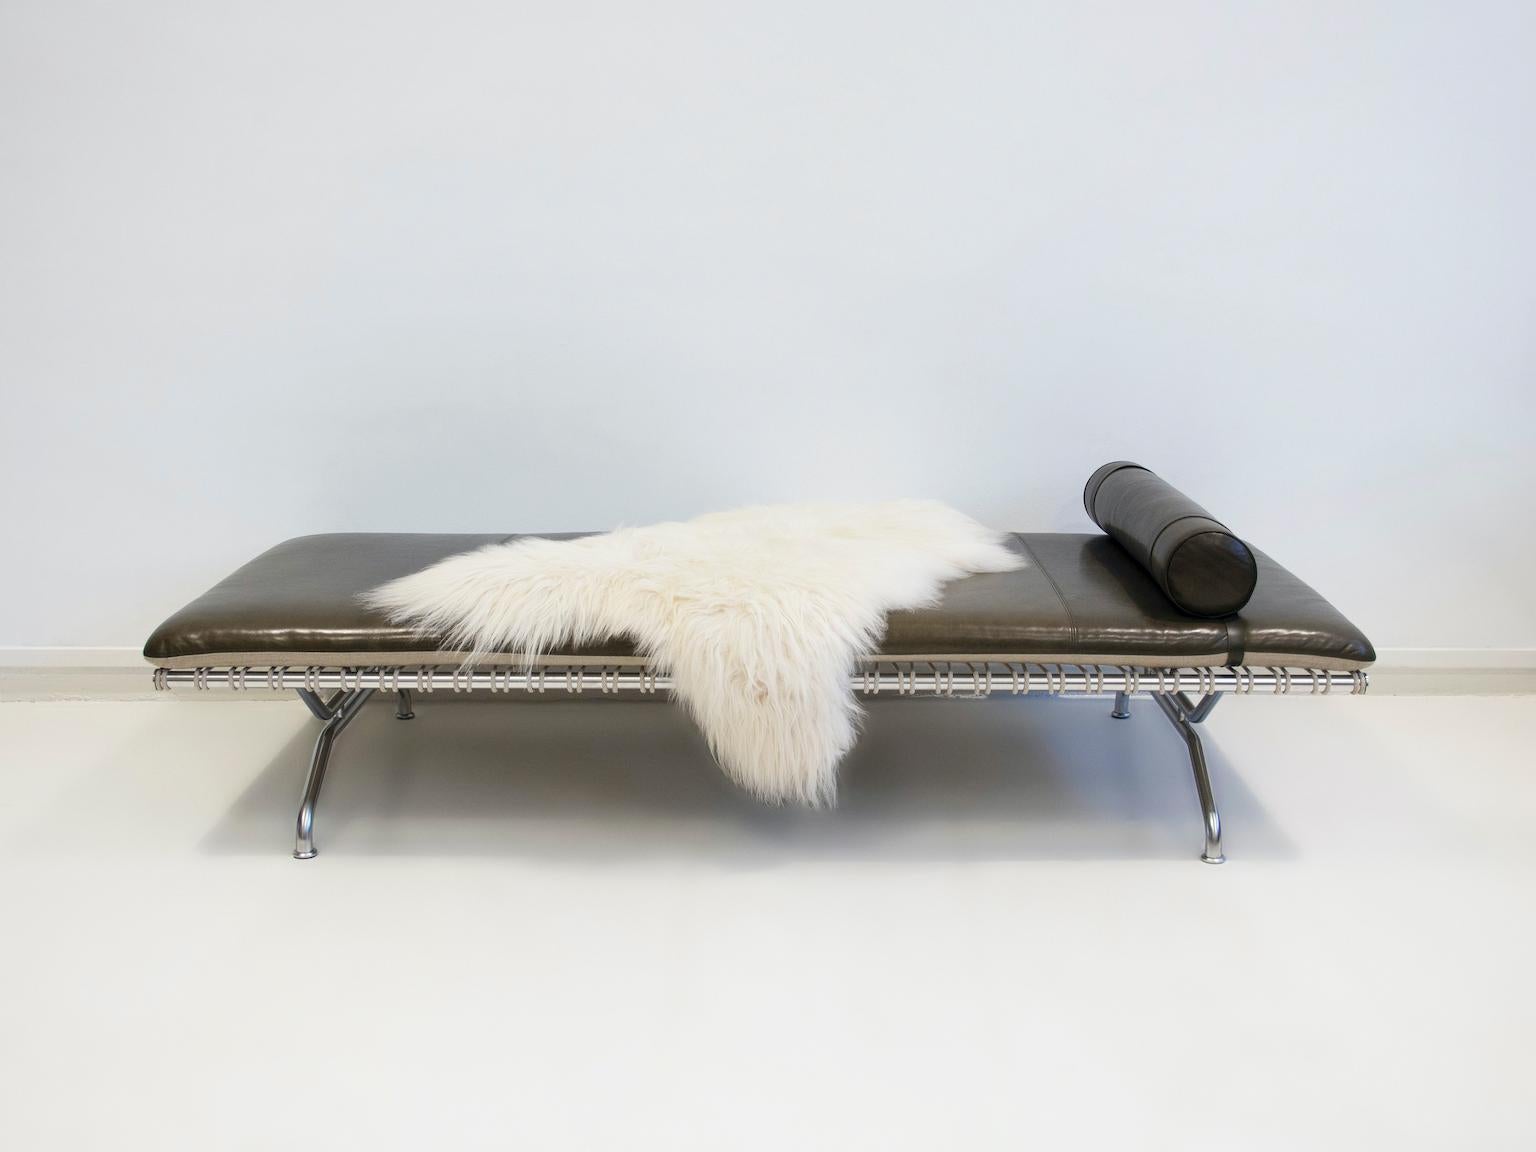 Daybed, model GD3, designed by Karsten Gransgaard and produced by Gransgaard Design. Label underneath. Matte chromed steel frame, cushion in dark green/brown aniline leather, removable neck pillow. Display model with minimal signs of wear. Lambskin